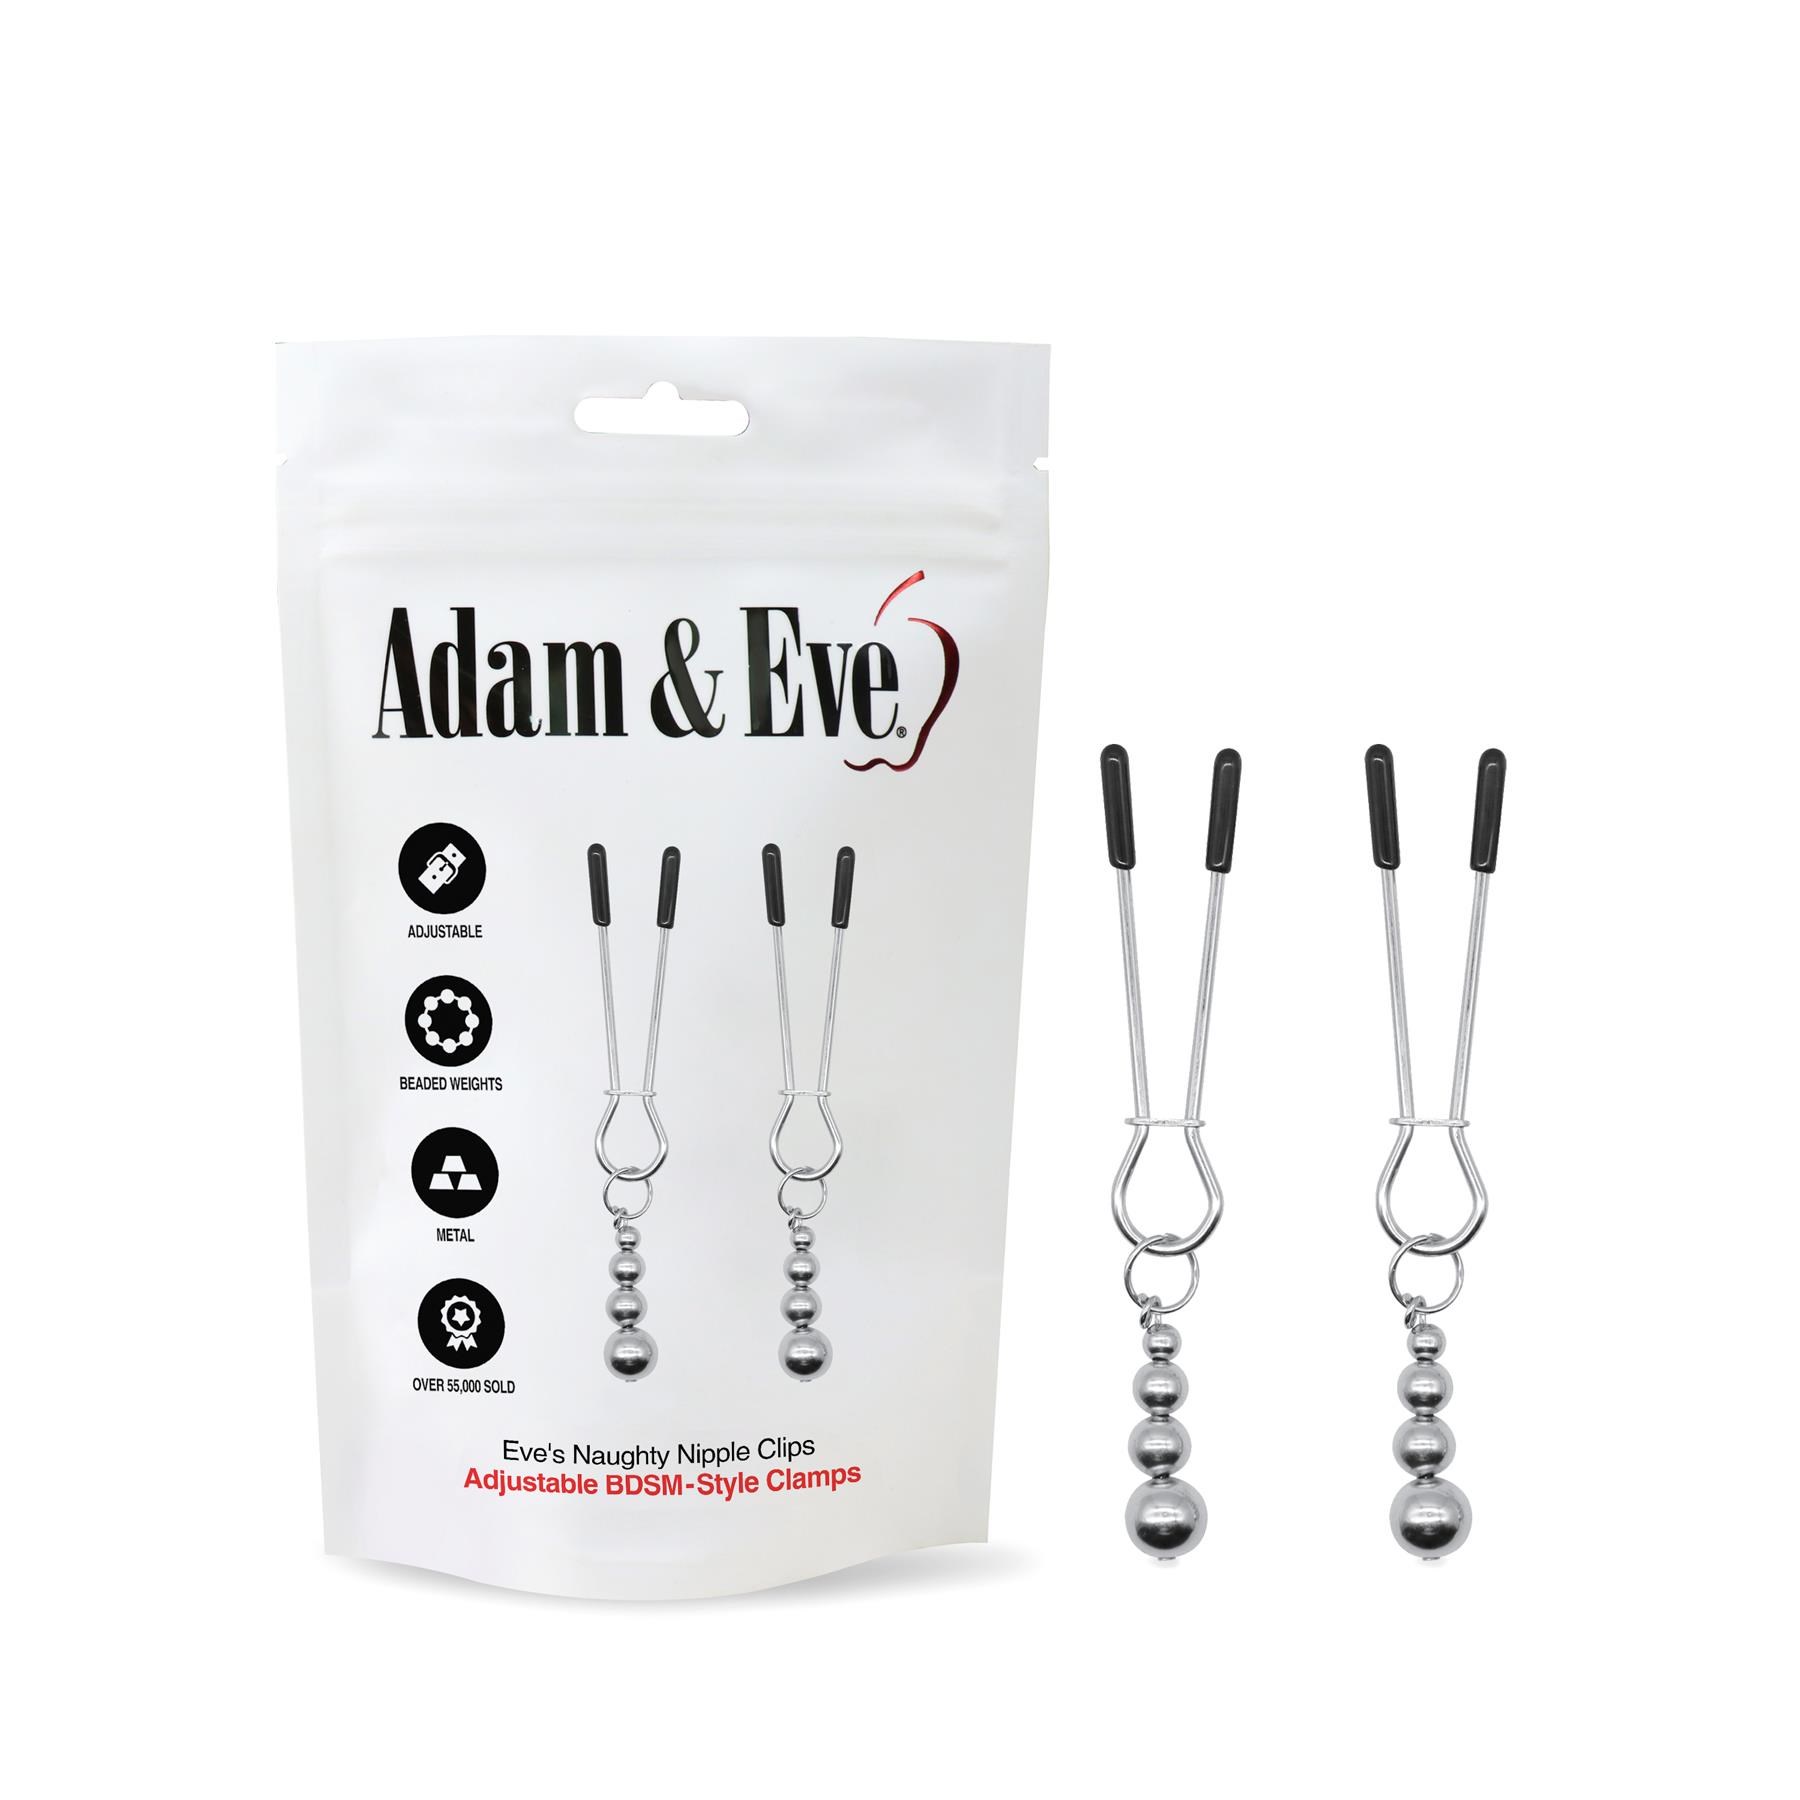 Eves Naughty Nipple Clamps - Product and Packaging